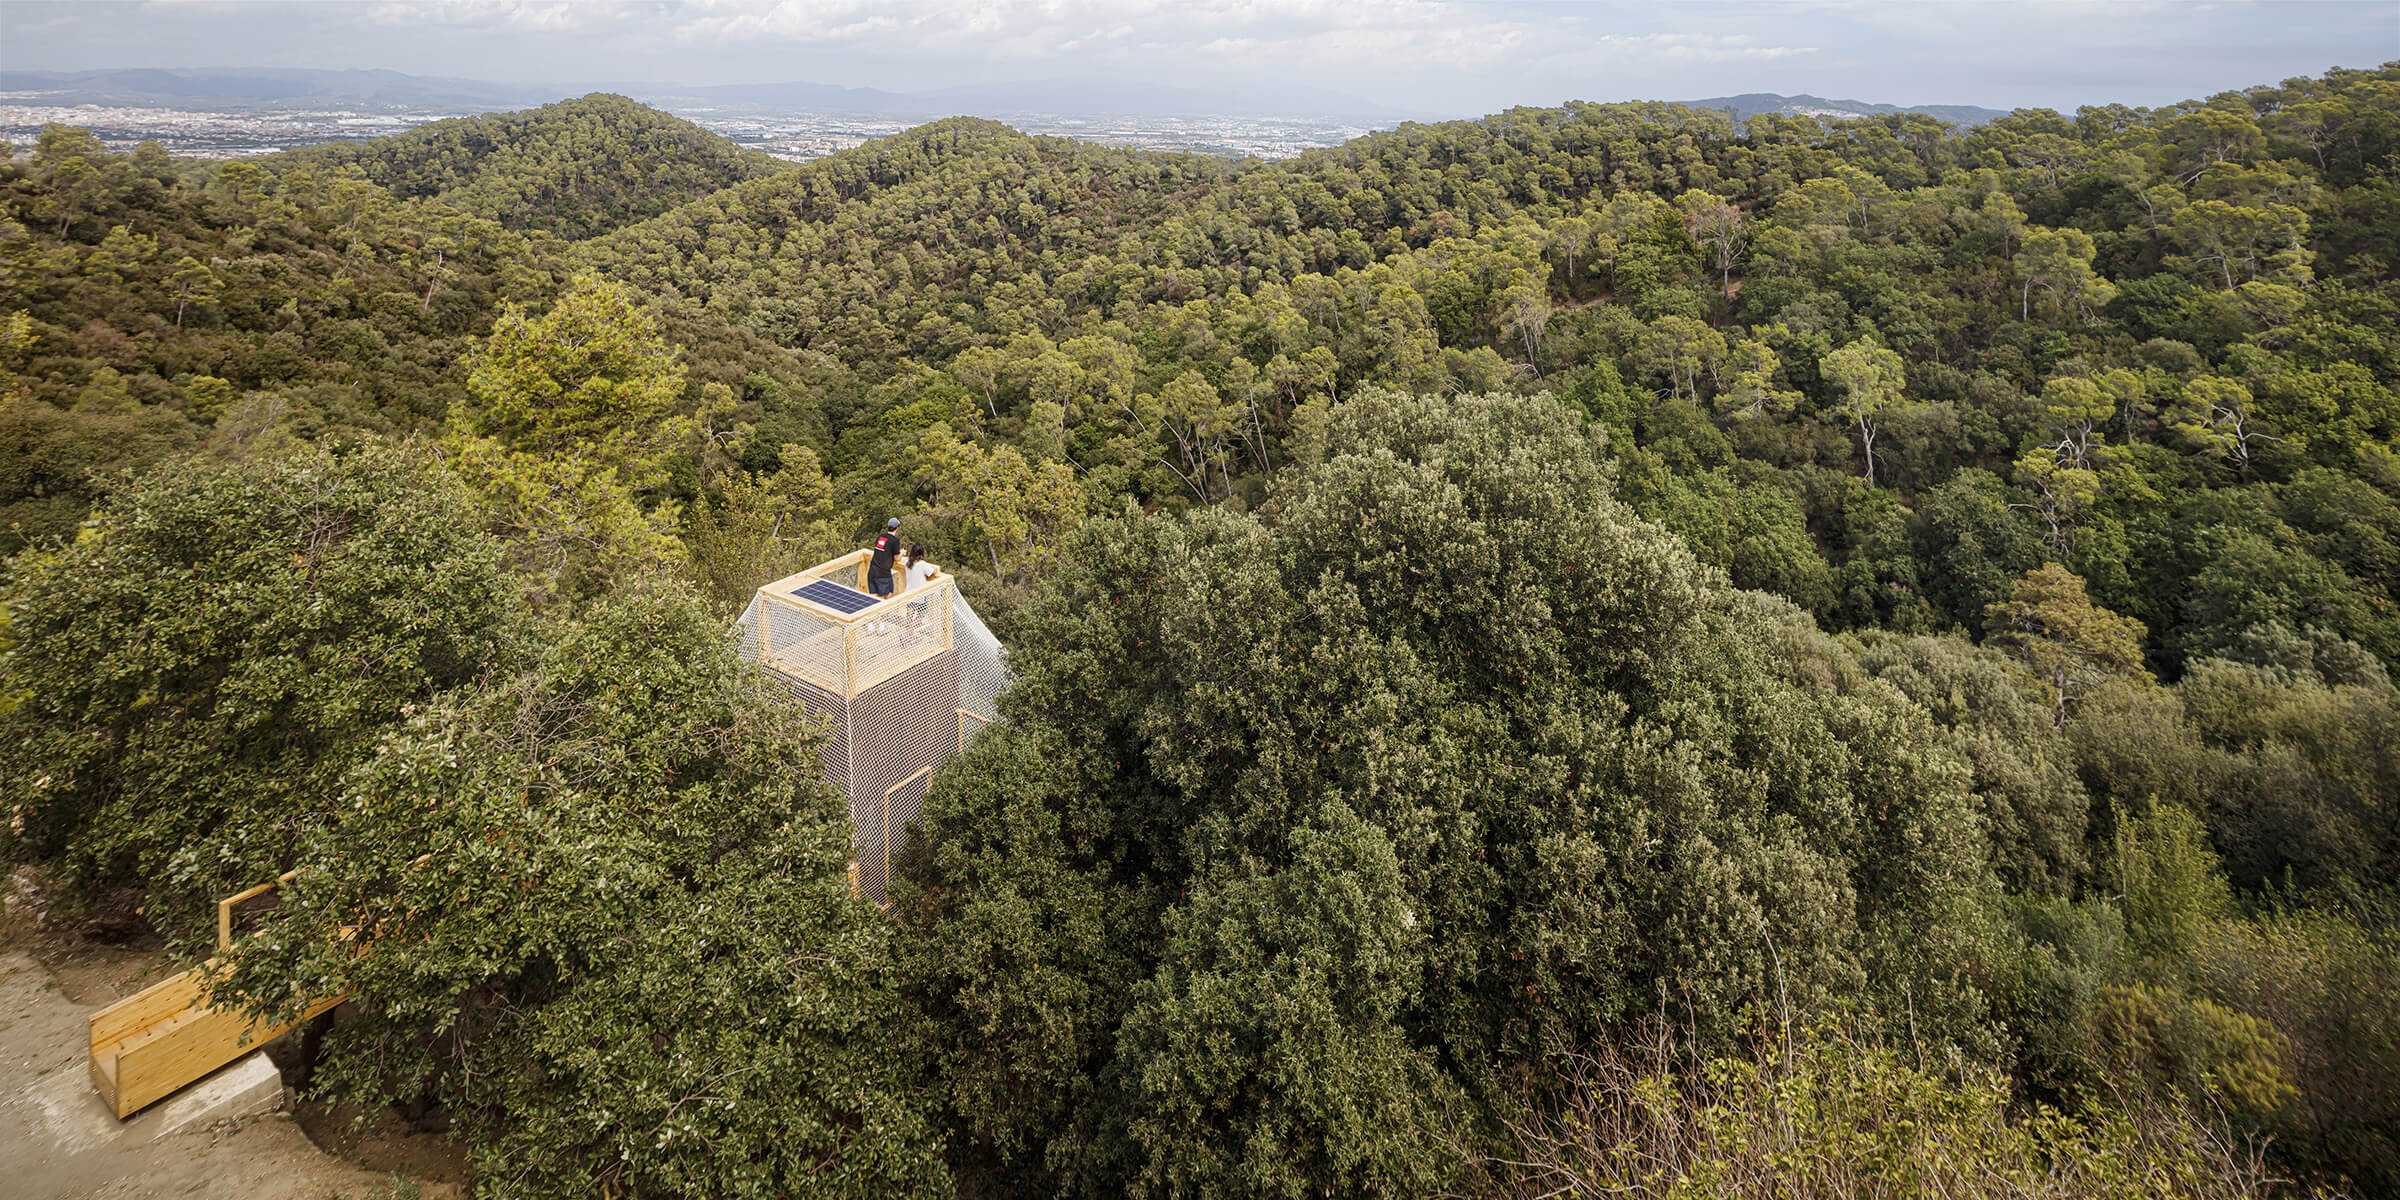 Forest Lab for Observational Research and Analysis (F.L.O.R.A), Parc de Collserola, Barcelona © Adrià Goula